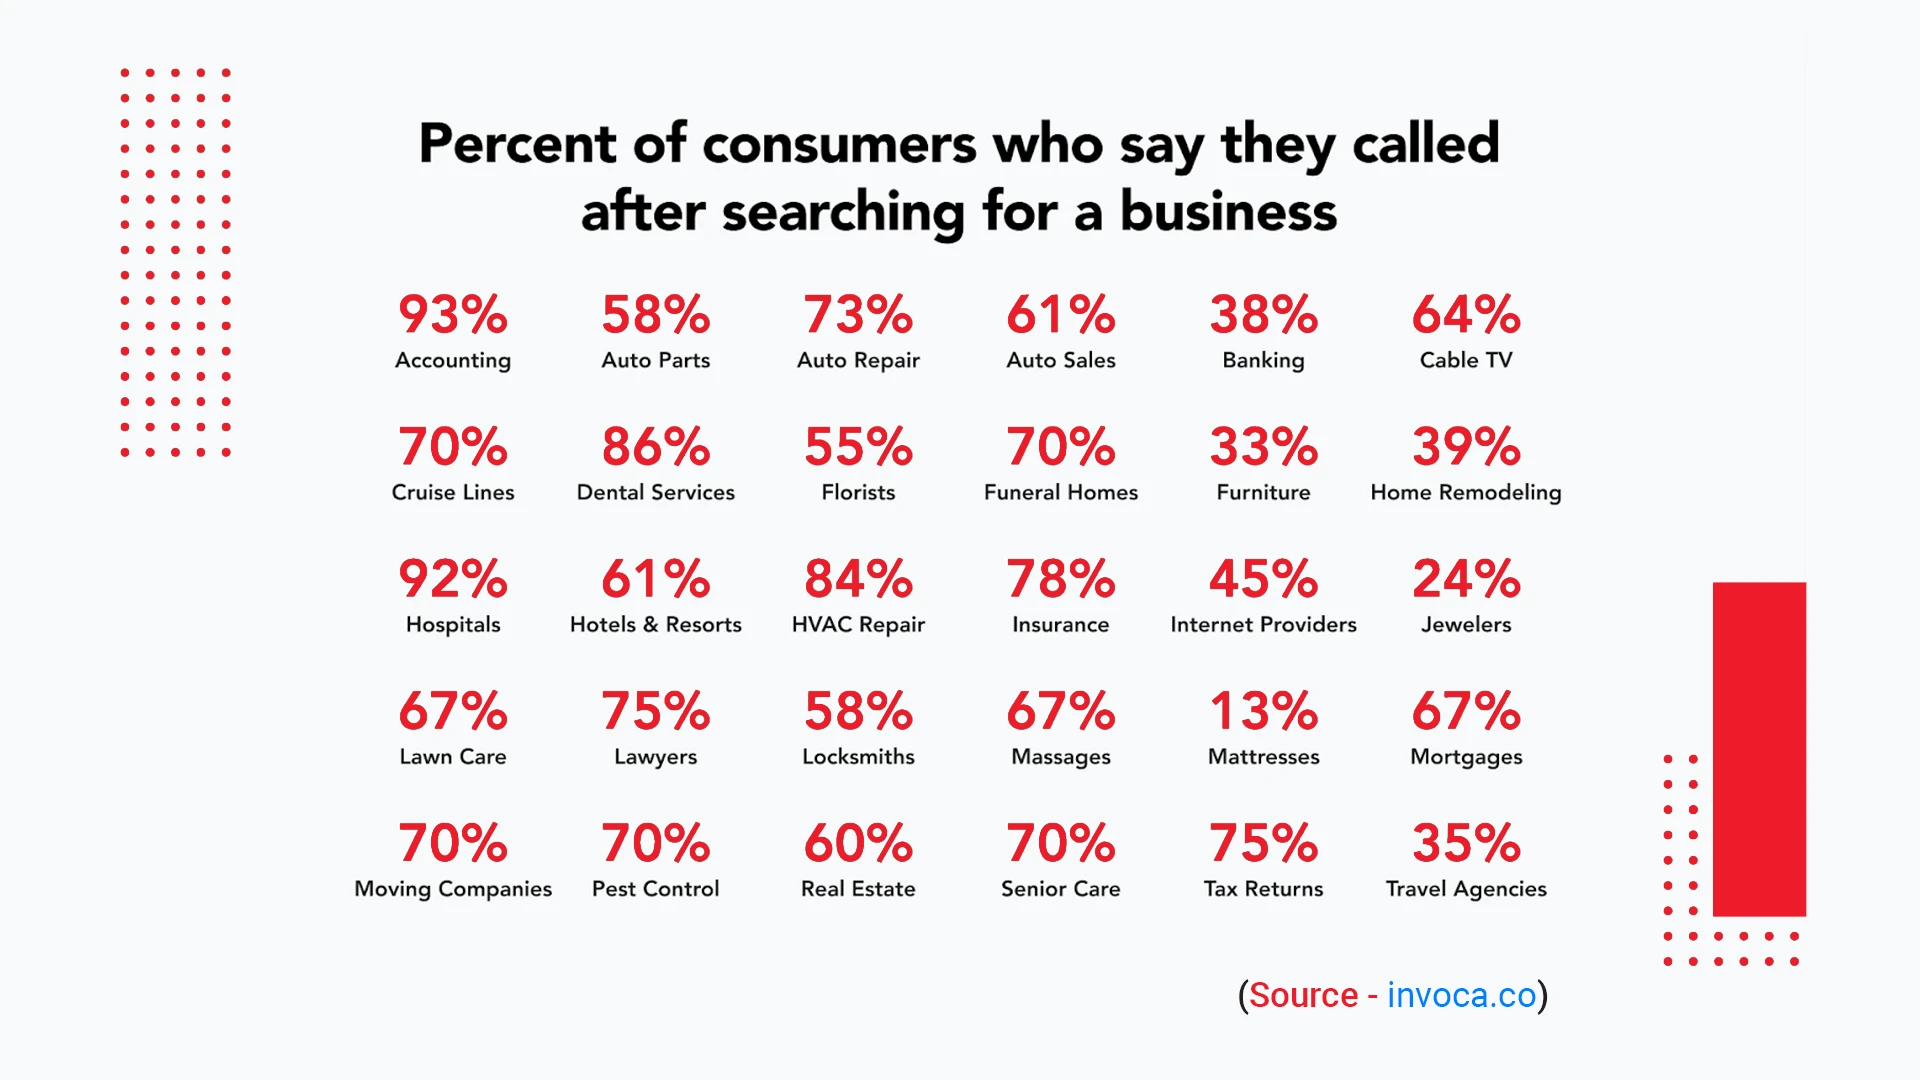 Percent of Consumers who say they called after searching for a business